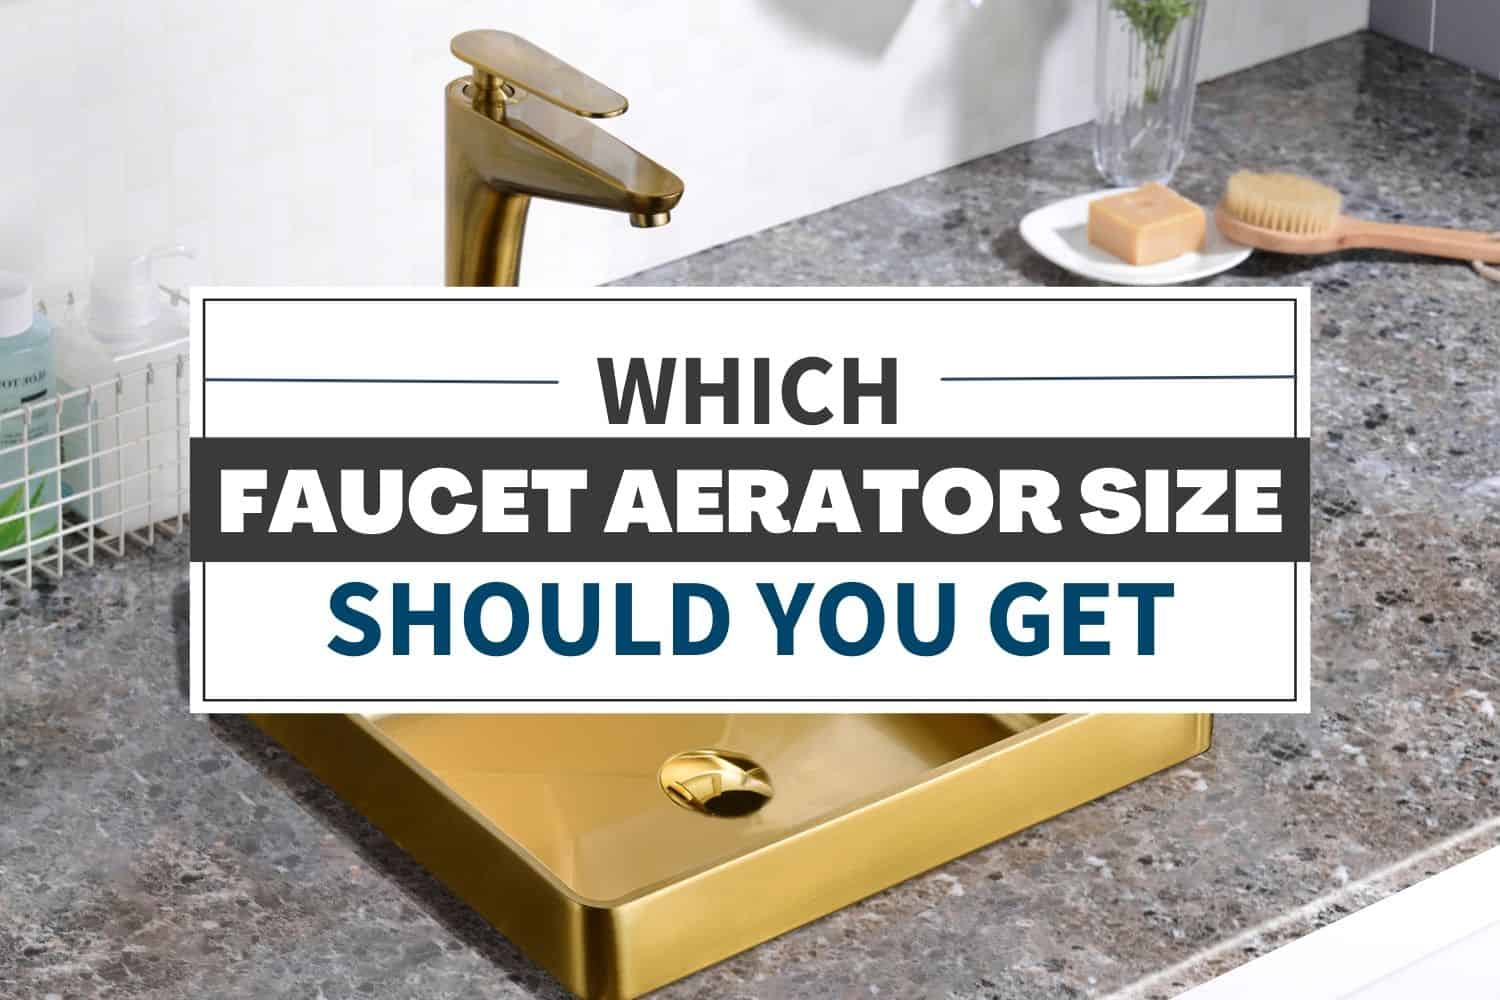 which faucet aerator size should you get